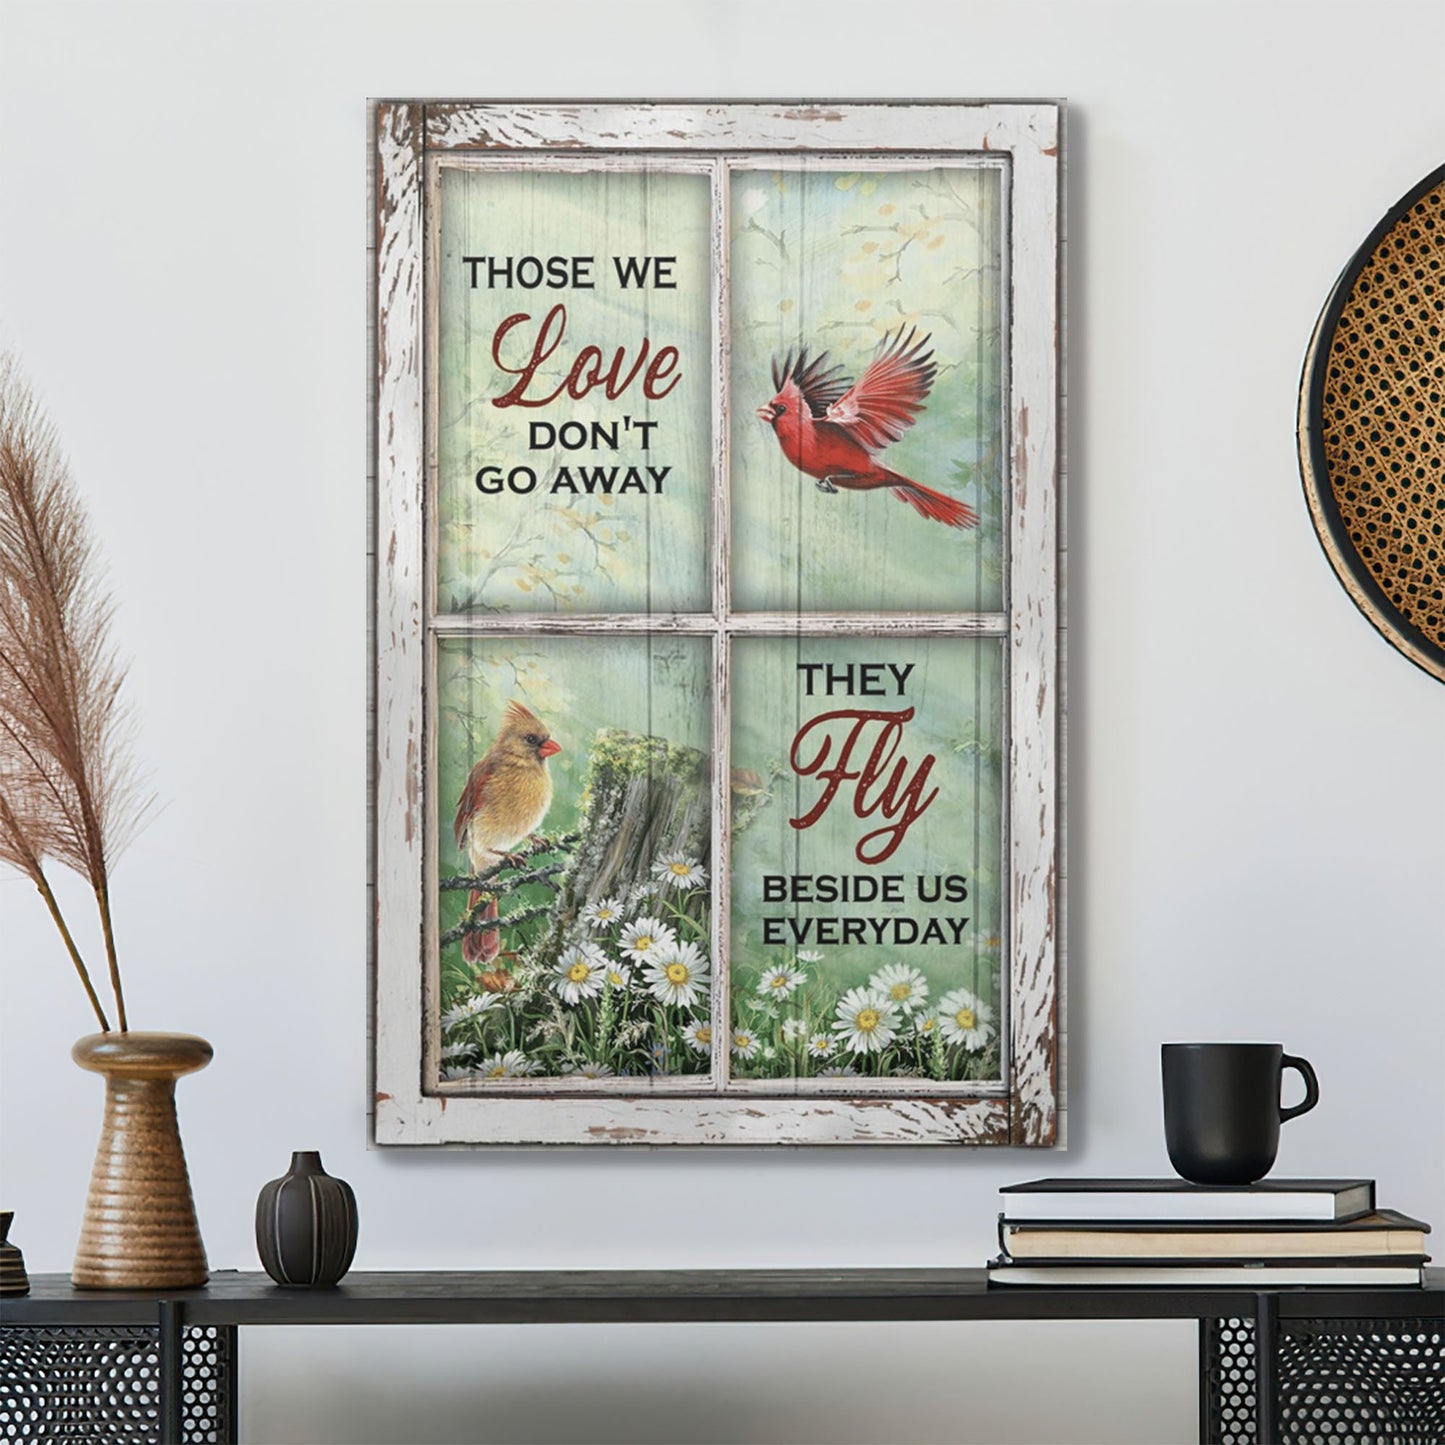 Christian Canvas Wall Art - Hummingbird And Window - Those We Love Dont Go Away Canvas - Bible Verse Canvas - Ciaocustom